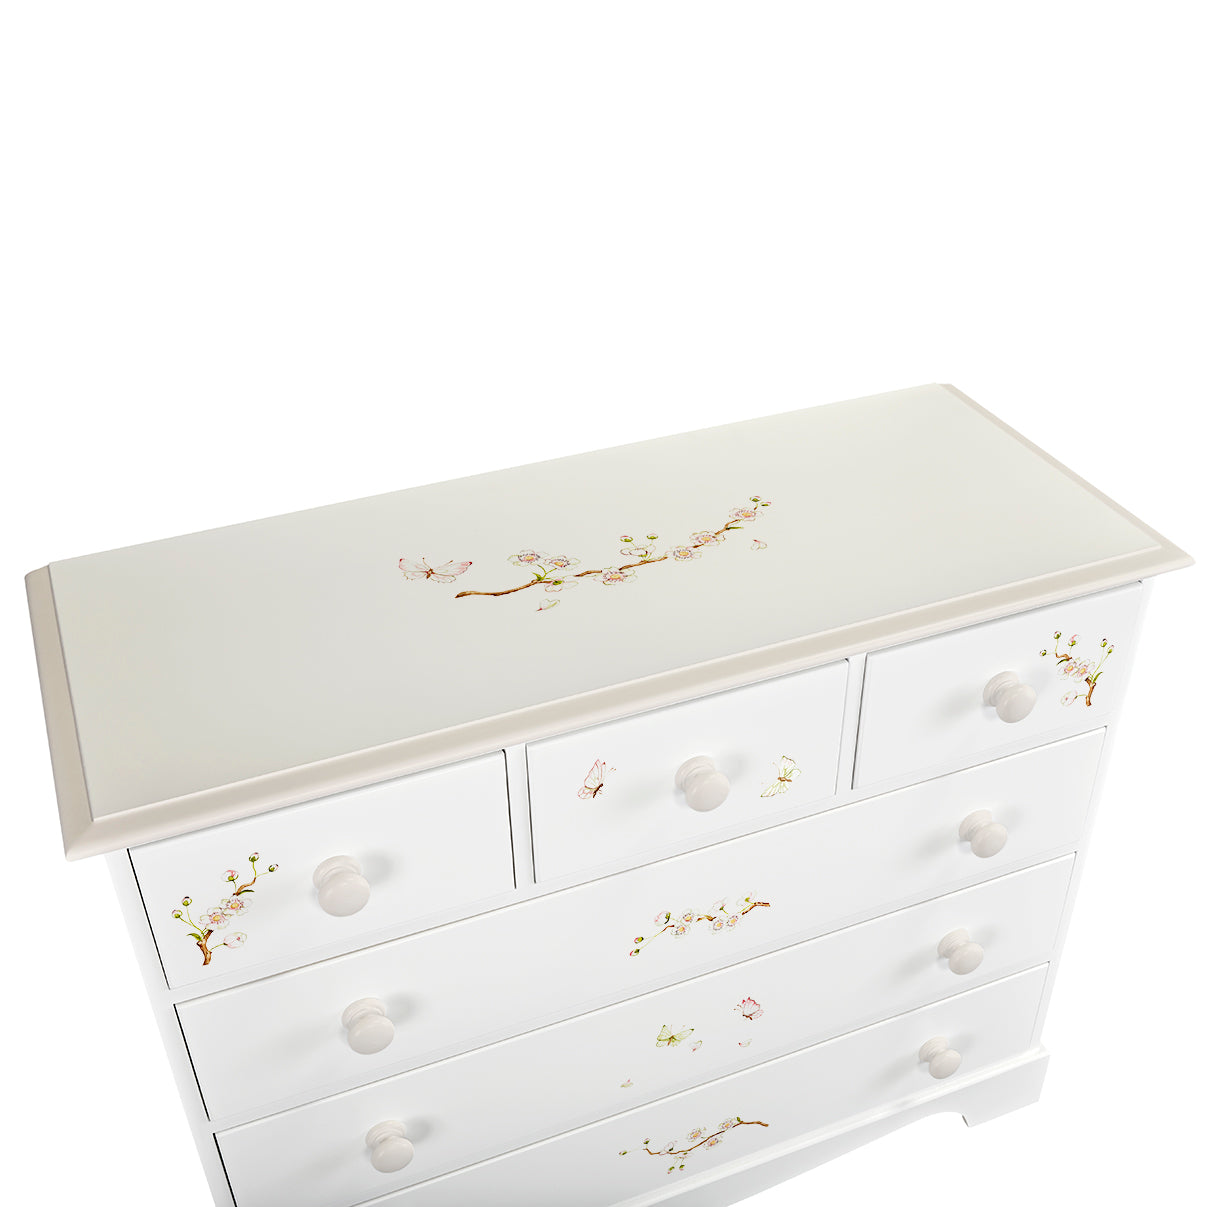 Extra Large Chest of Drawers - Linen Blossom with Soft Jute Trim